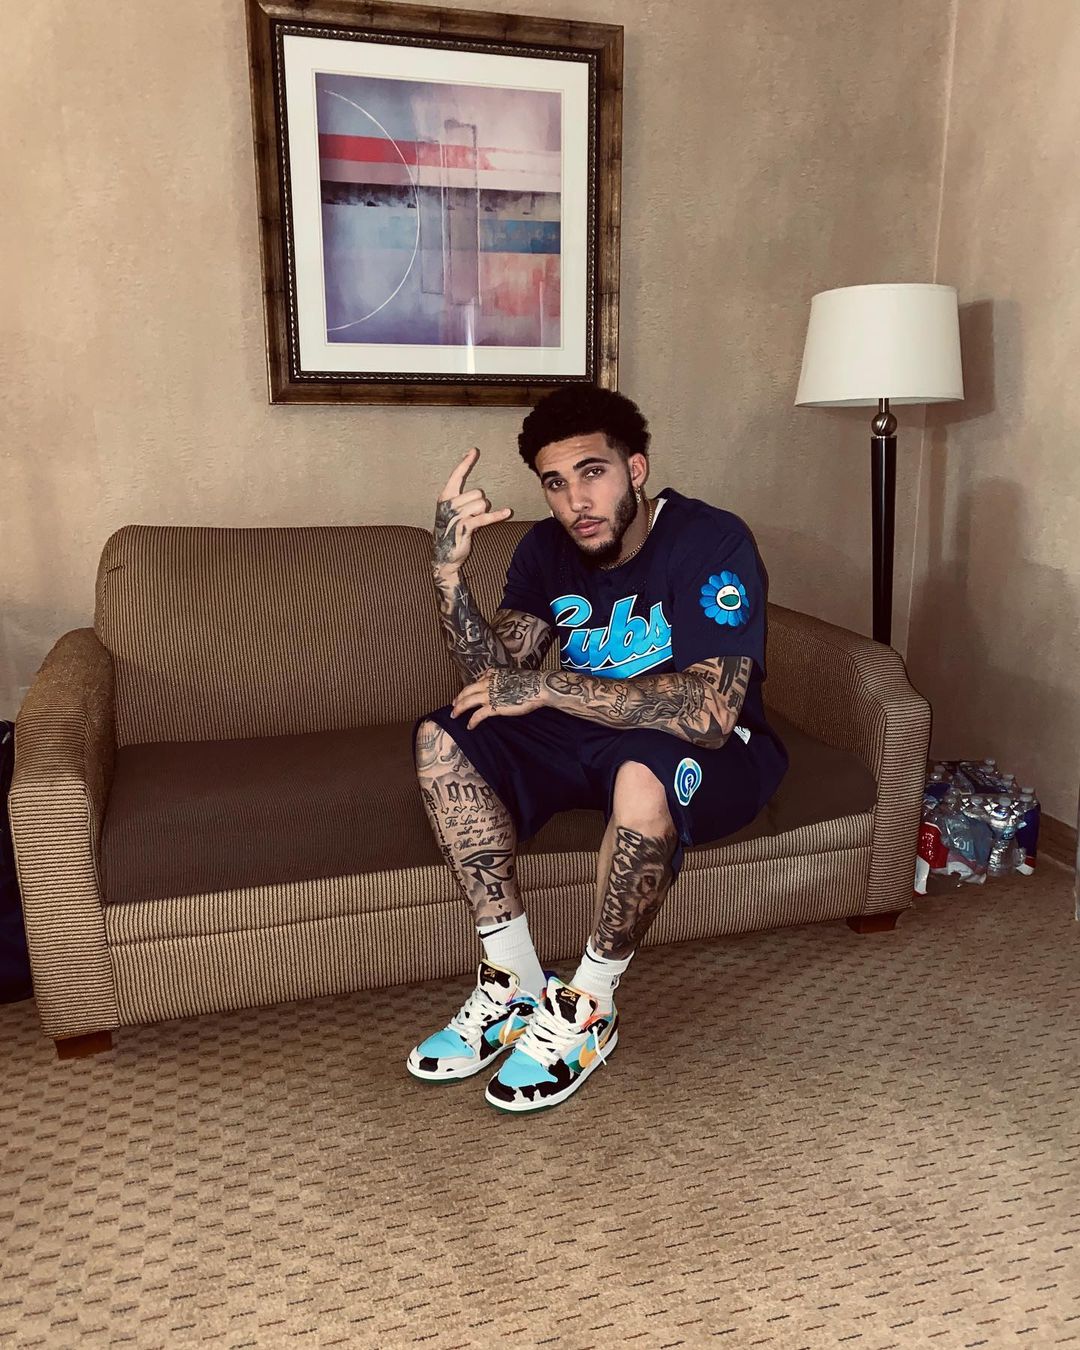 LiAngelo Ball 2021 Net Worth, Salary, Records, and Endorsements